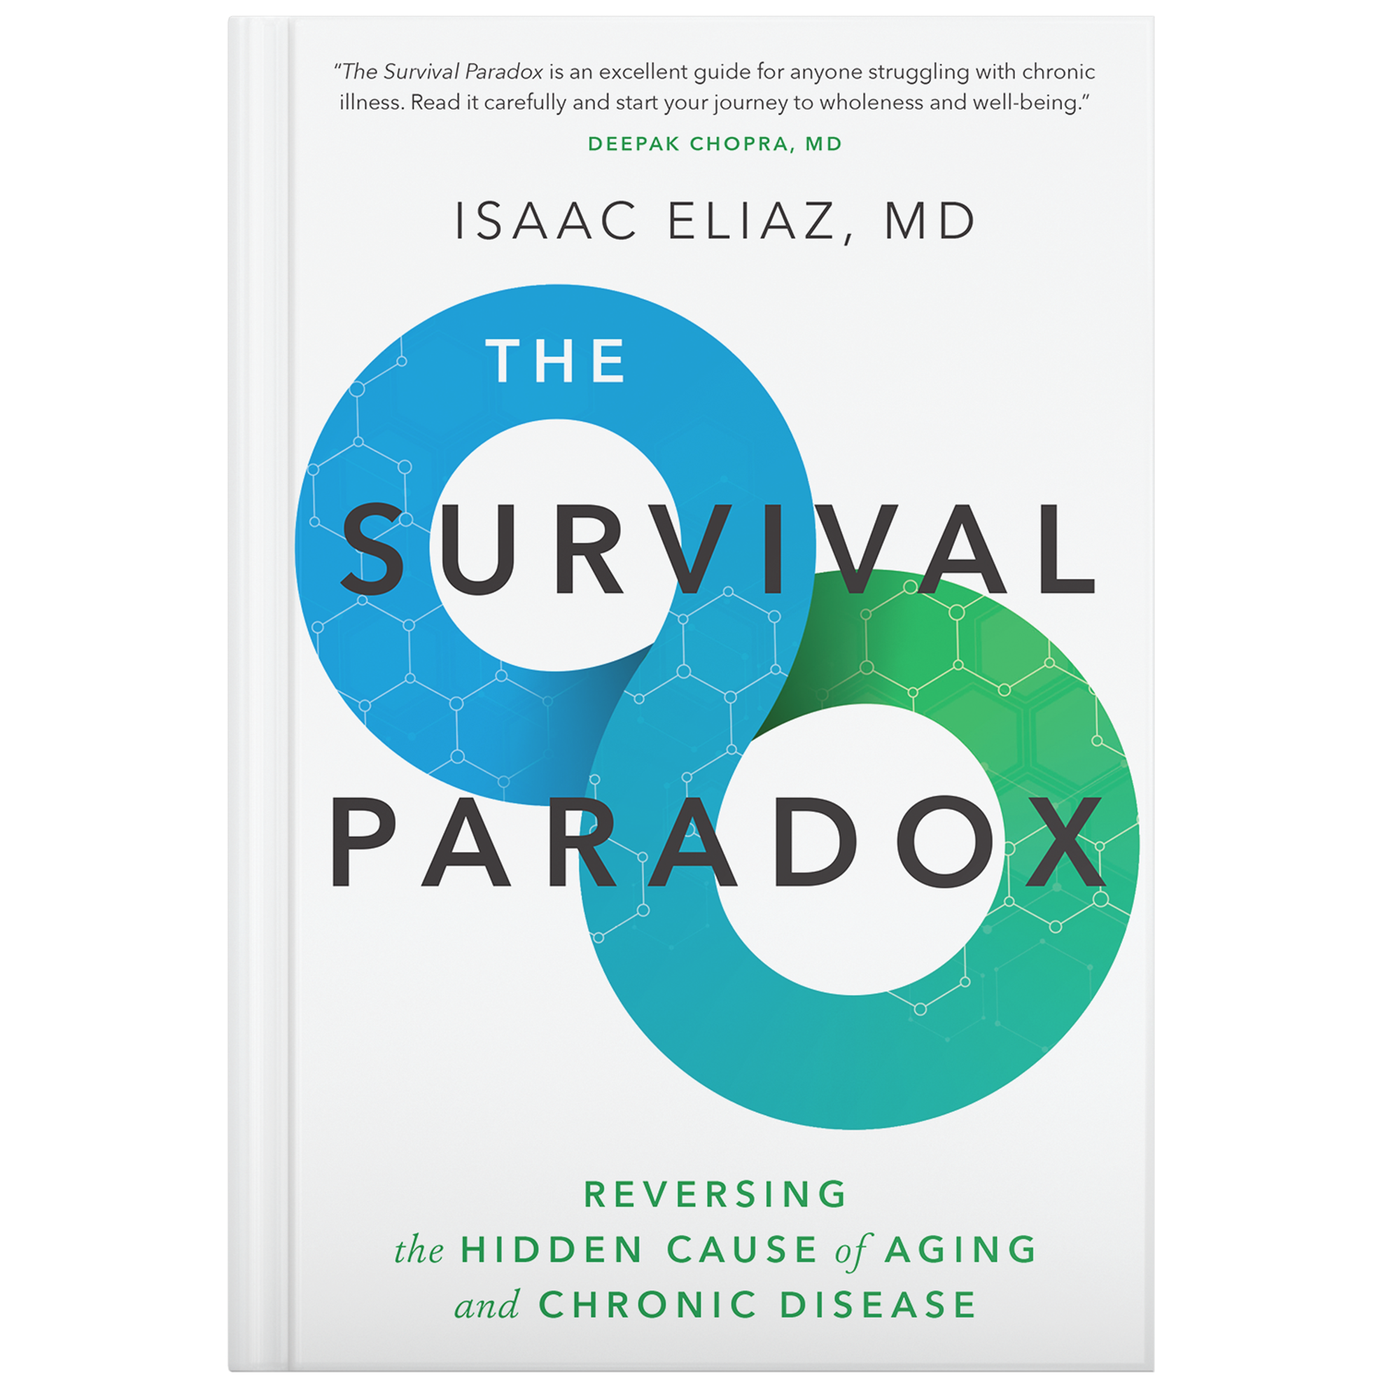 The Survival Paradox by Dr. Isaac Eliaz Curated Wellness